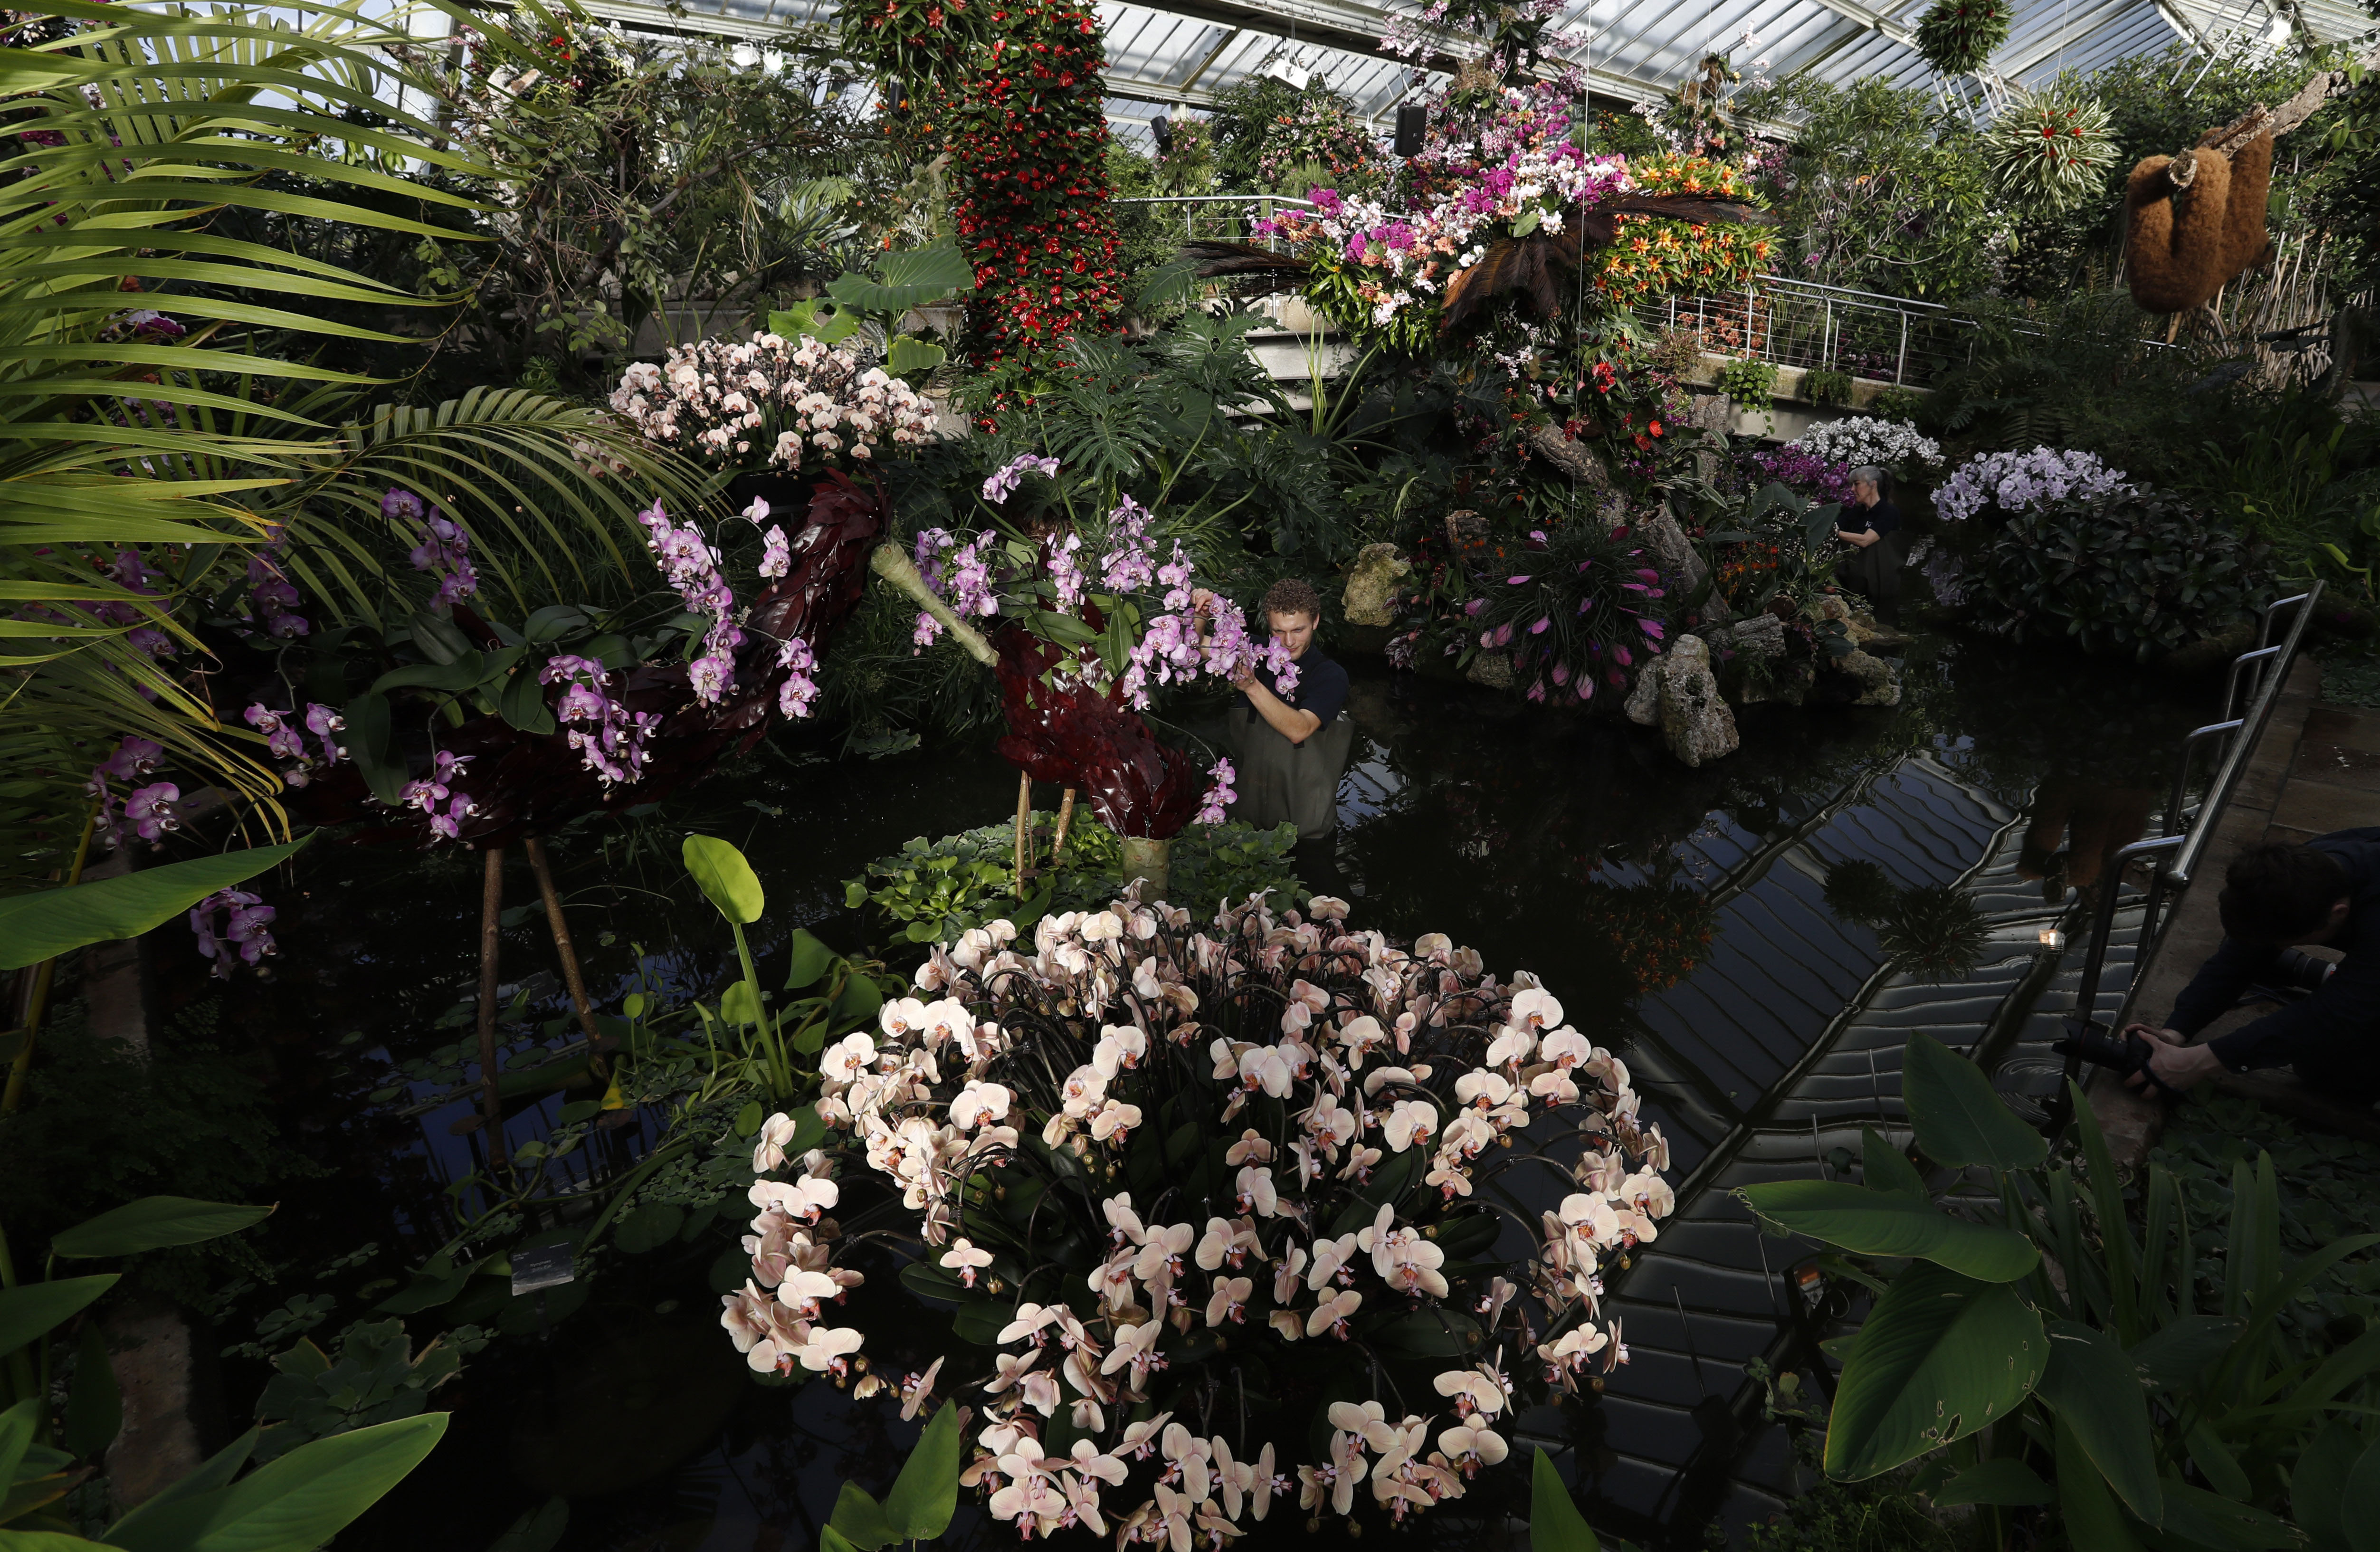 Tom Forshaw, a Horticulture apprentice, attends to a display of orchids at the Kew Gardens Orchid Festival during a press preview at Kew Gardens in London, Thursday, Feb. 7, 2019. The display of some 6,200 orchids took 30 days to complete, with the central display showing off the biodiversity of Colombia which is home to more species of orchid than anywhere else in the world. The display opens to the public on Feb.9. (AP Photo/Alastair Grant)